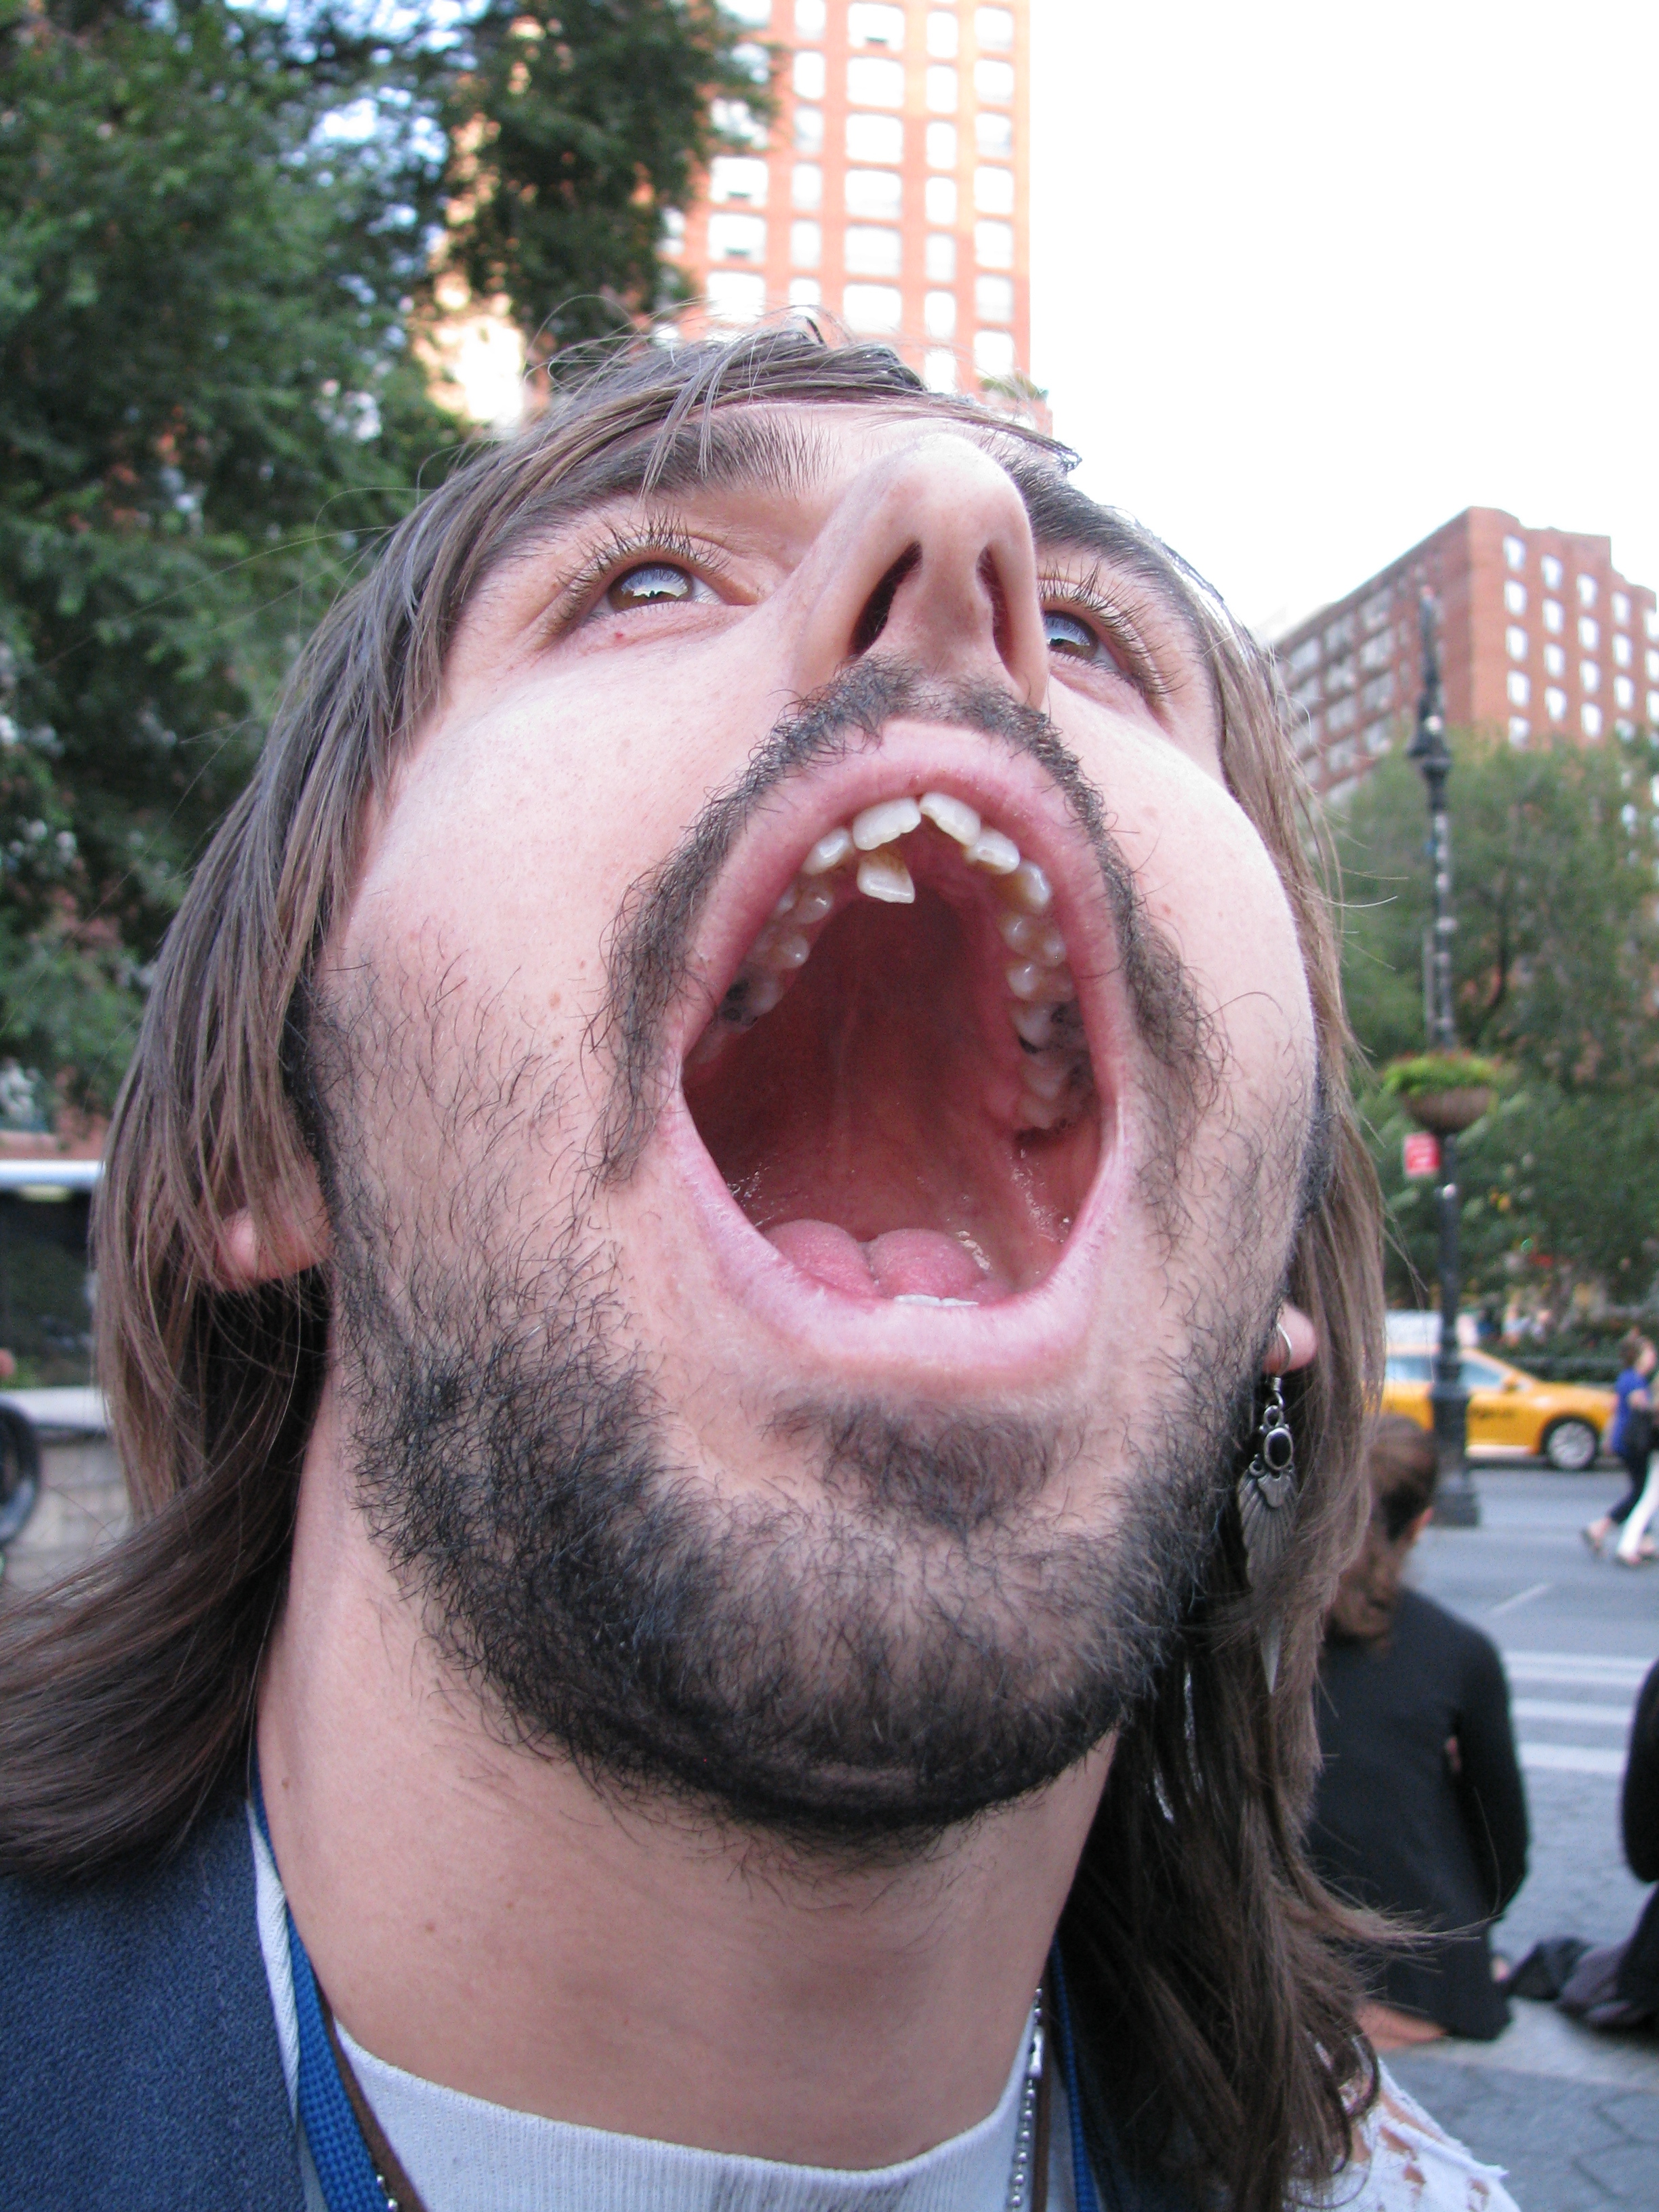 Man shows his extra tooth growing from roof of mouth